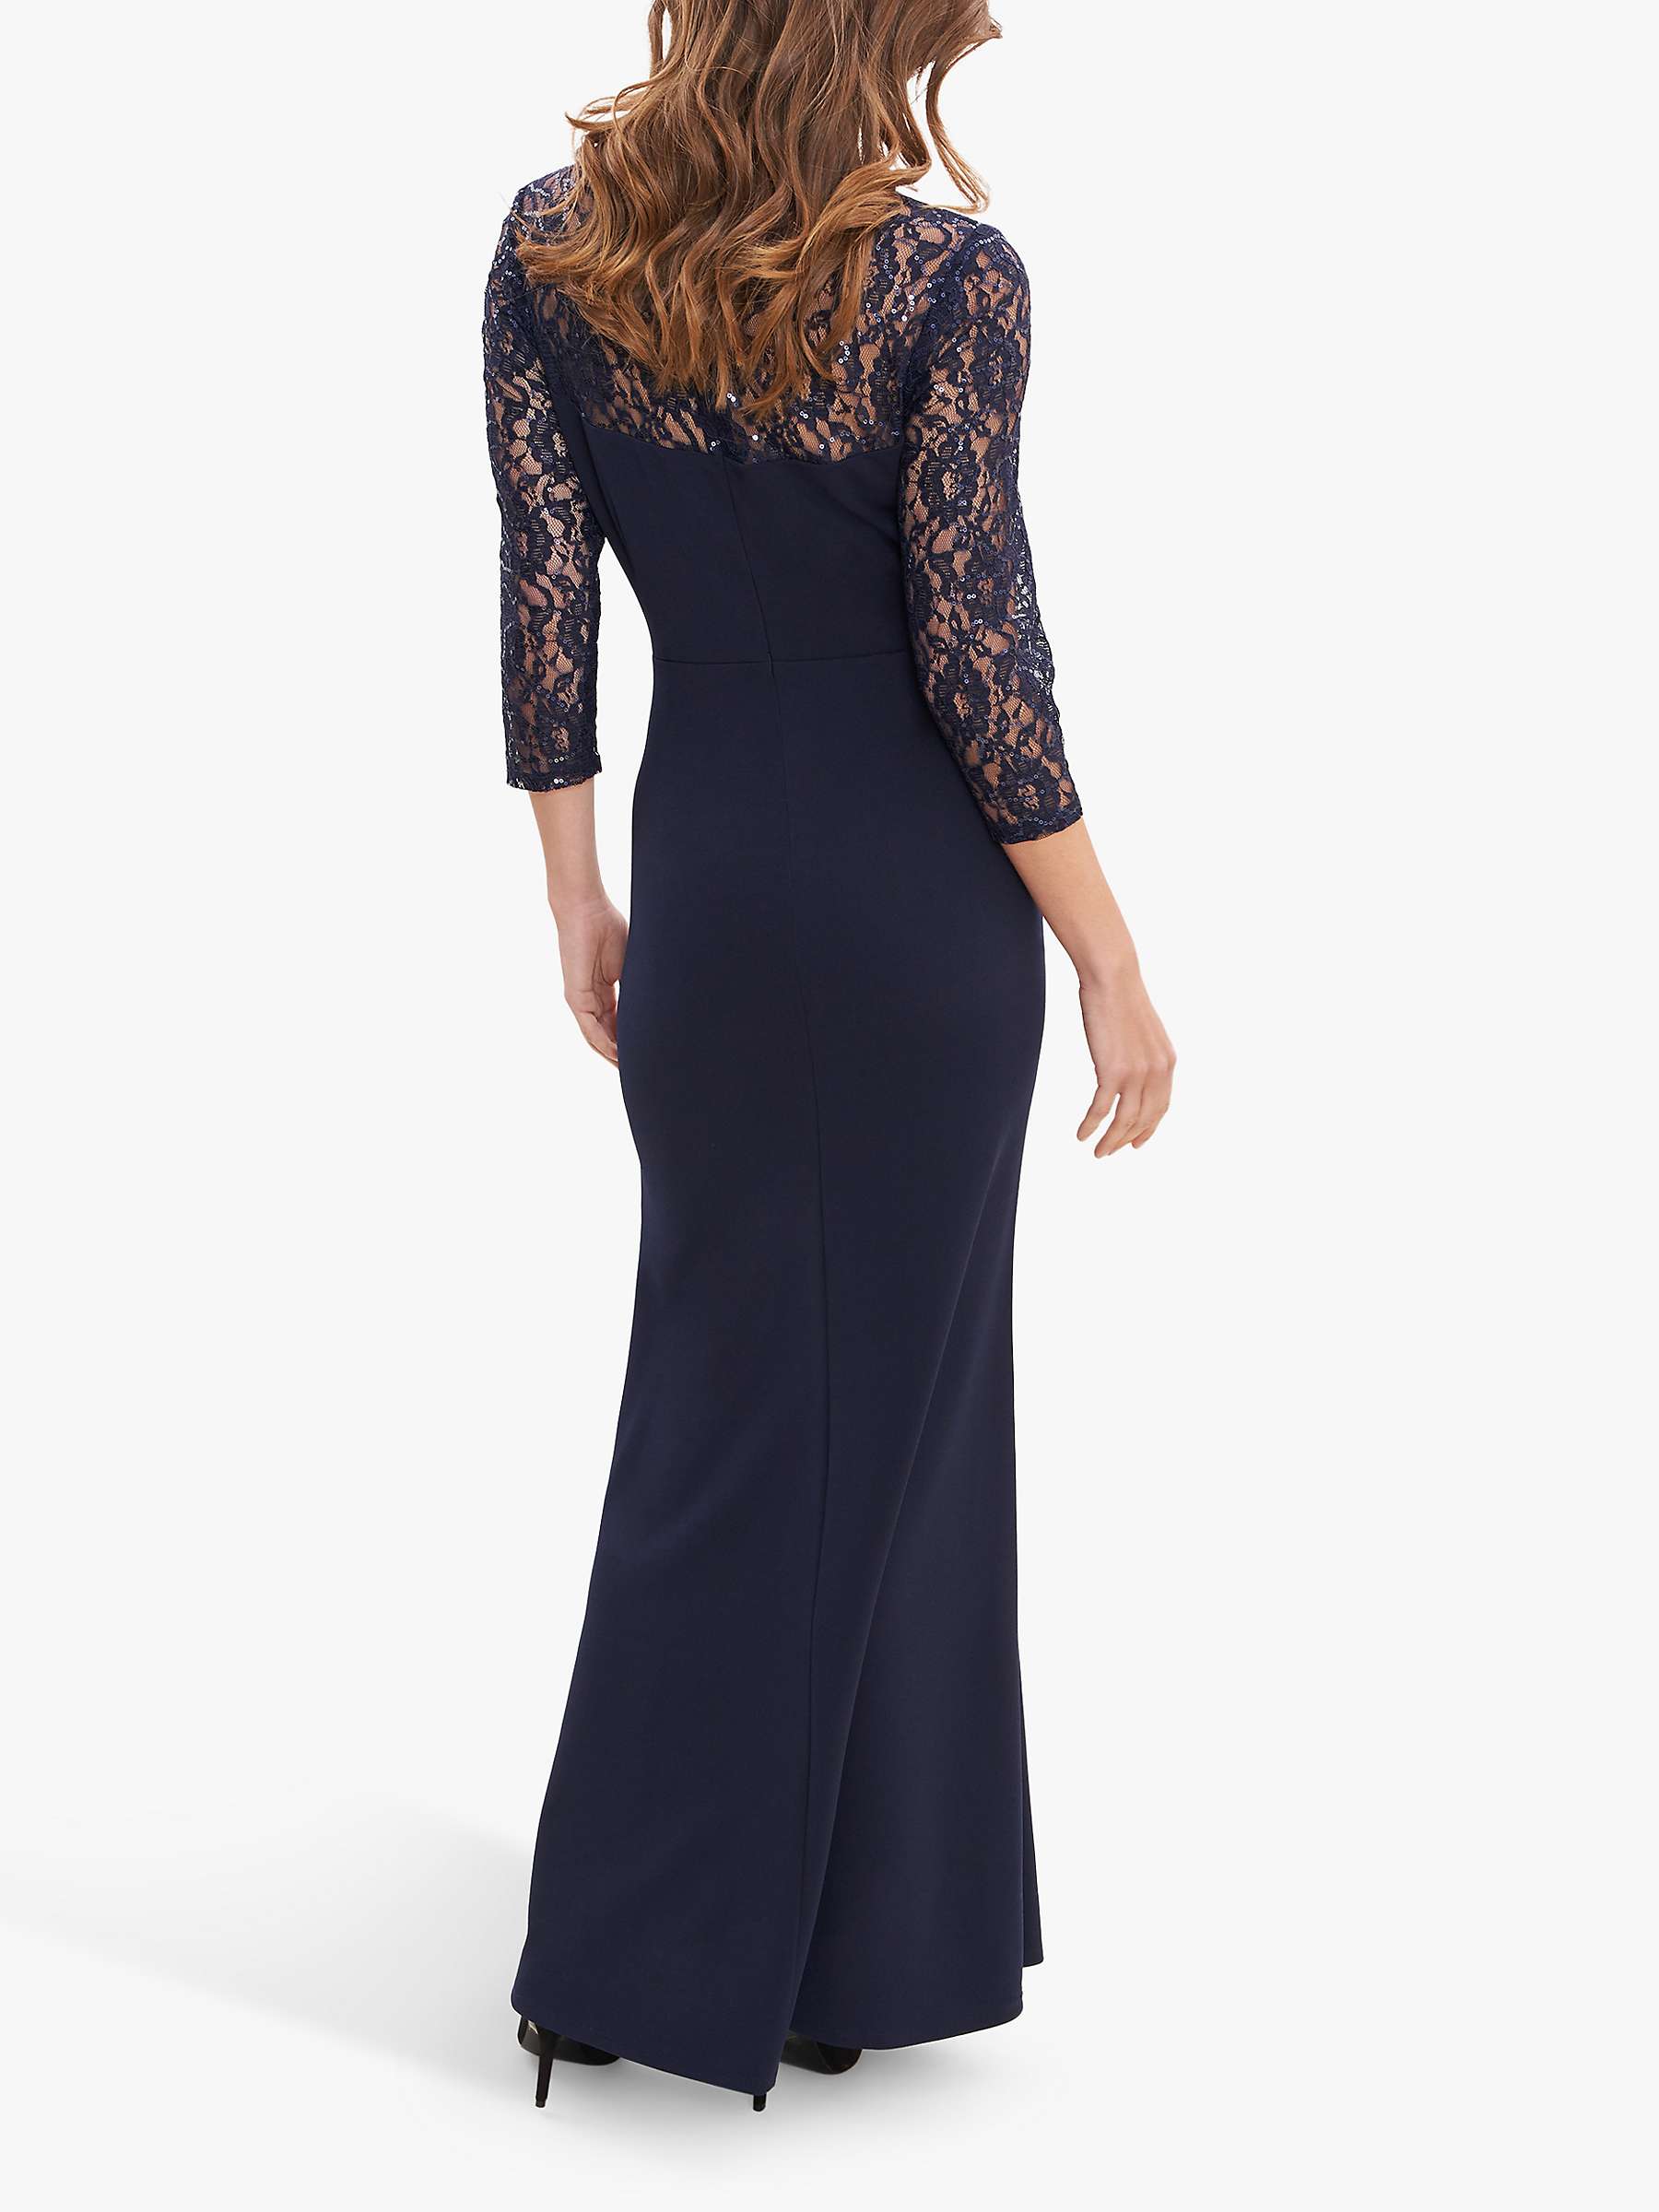 Buy Gina Bacconi Una Floral Lace Sleeve Maxi Dress, Navy Online at johnlewis.com